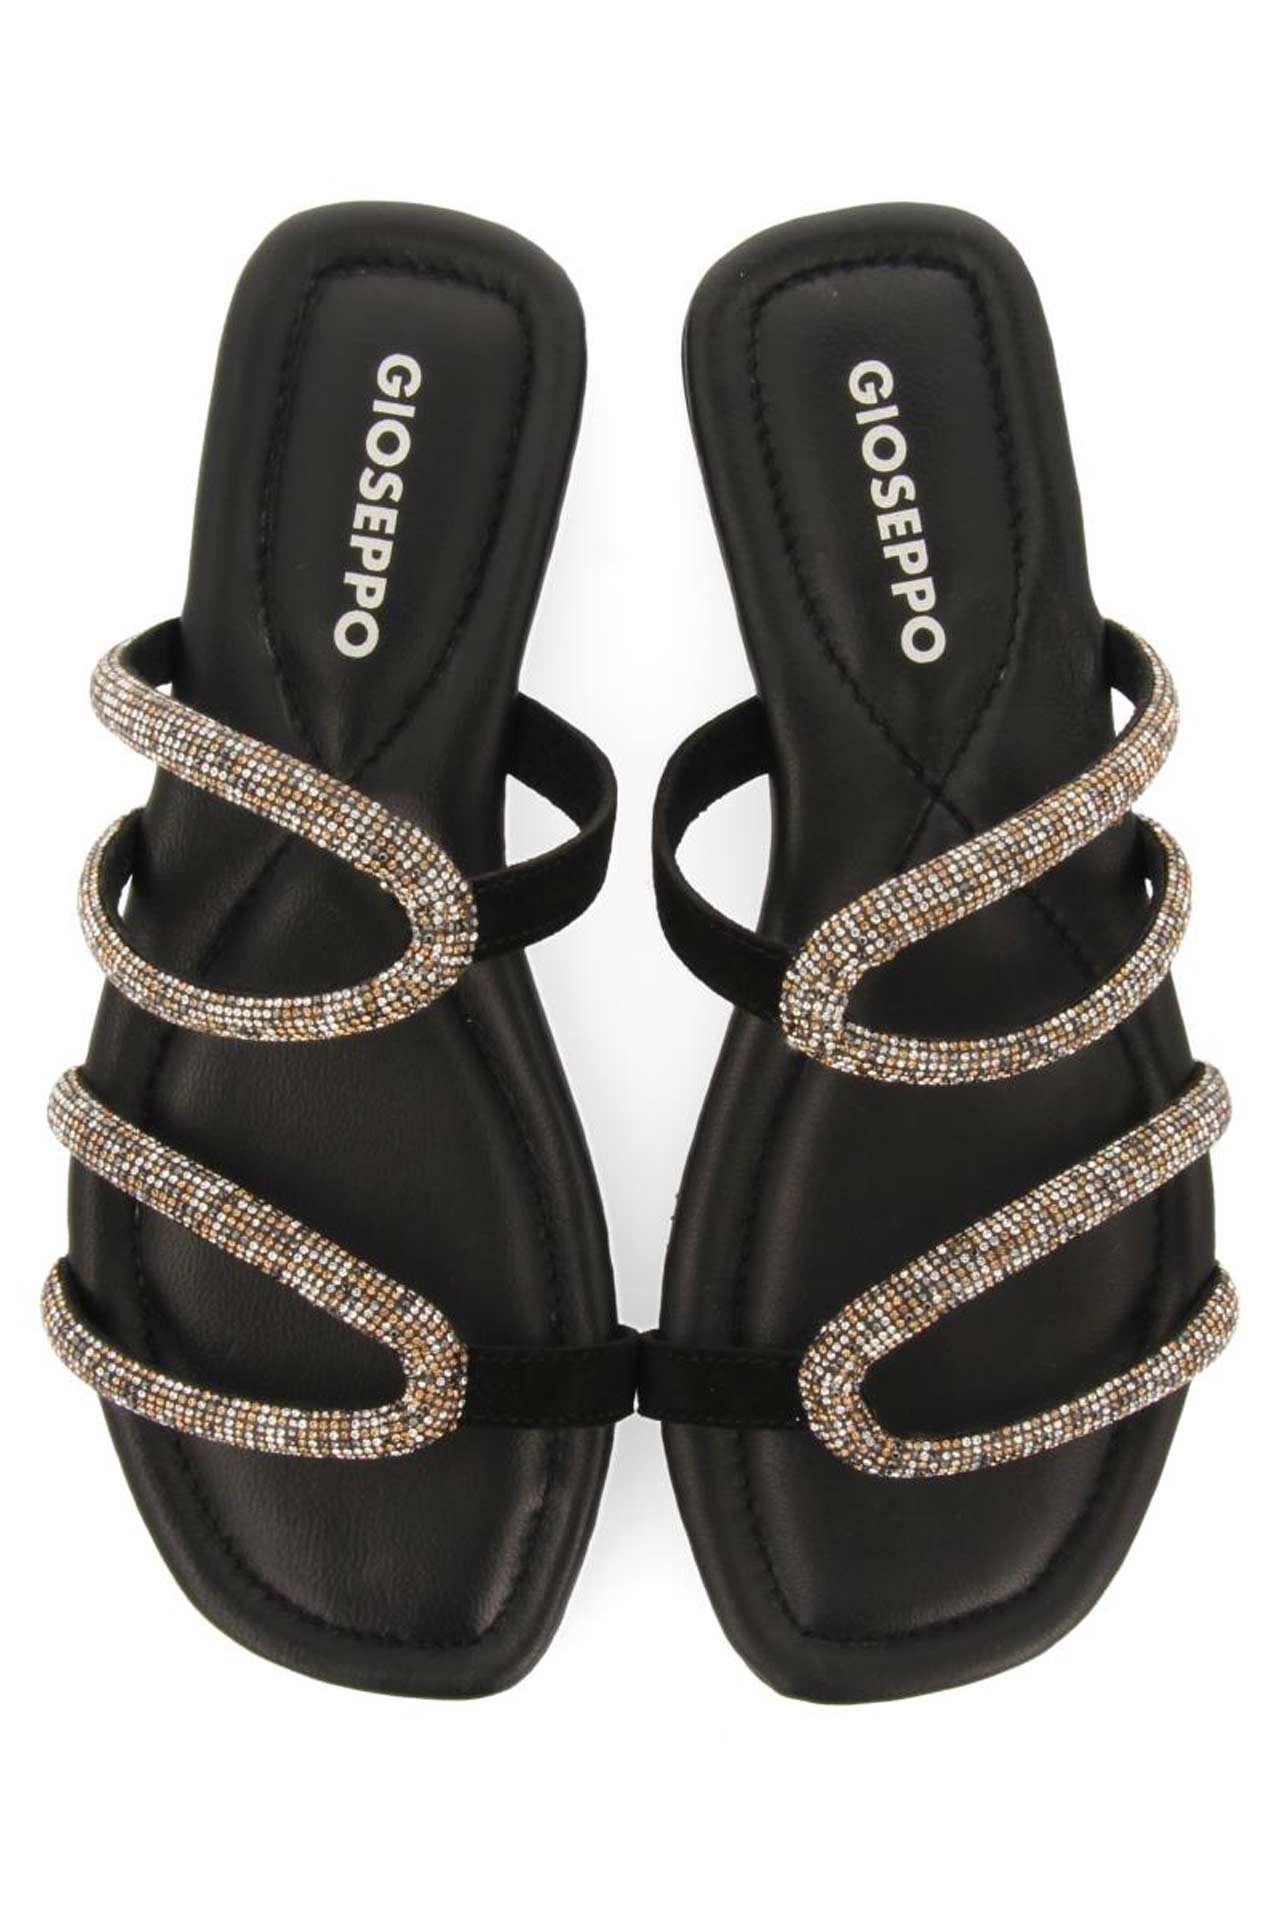 GIOSEPPO BONIFAY BLACK LEATHER SANDALS WITH STRAPS AND EMBELLISHMENTS